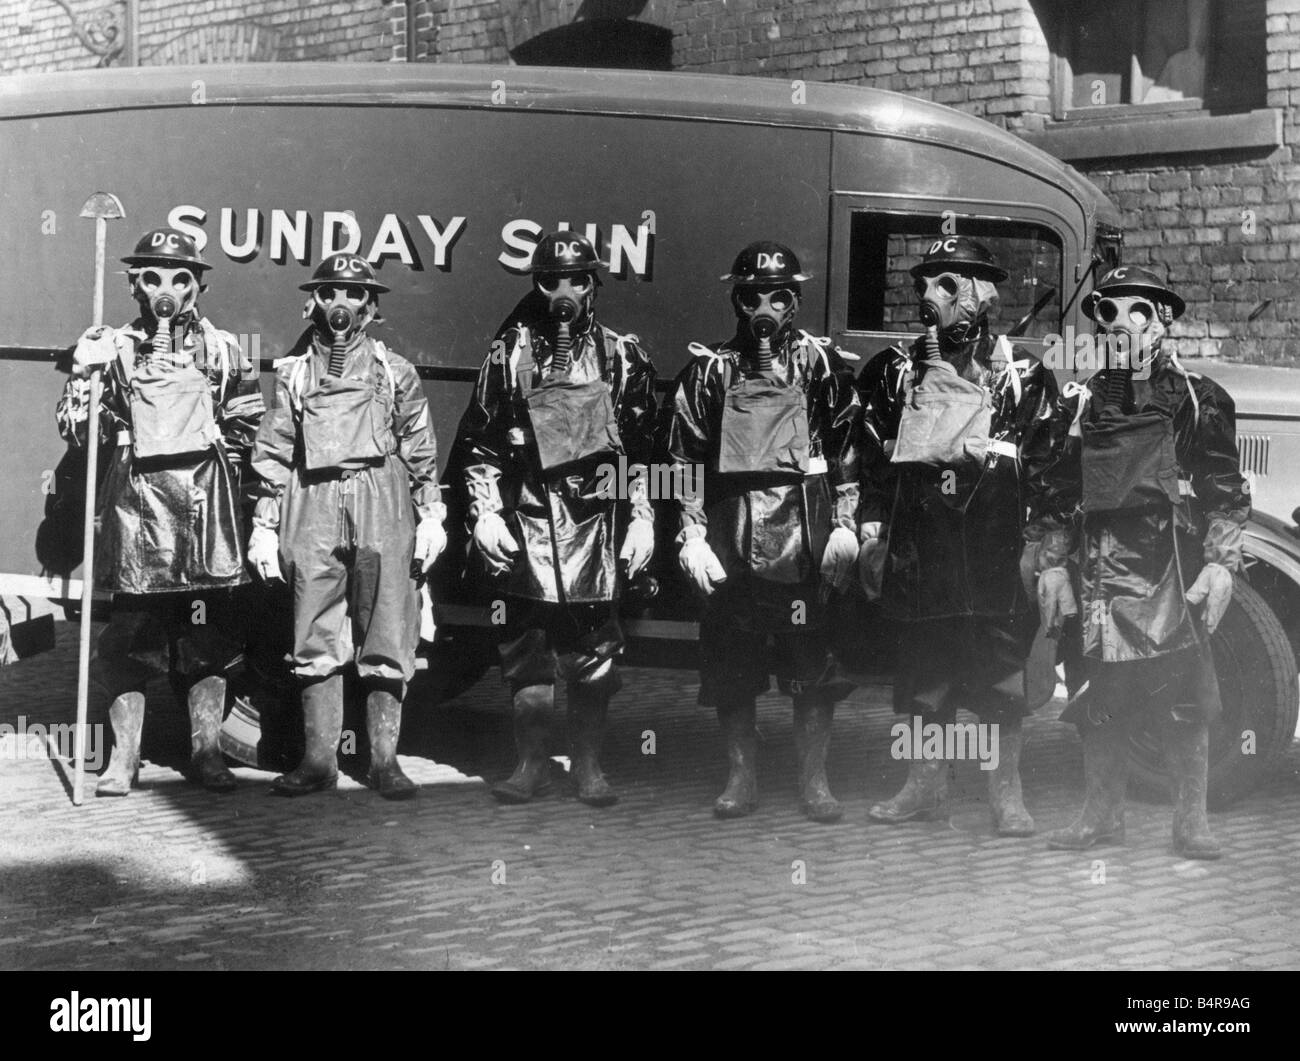 Air raid precautions Men wearing World War Two gas masks and protective clothing circa 1940 standing in front of Sunday Sun van Stock Photo